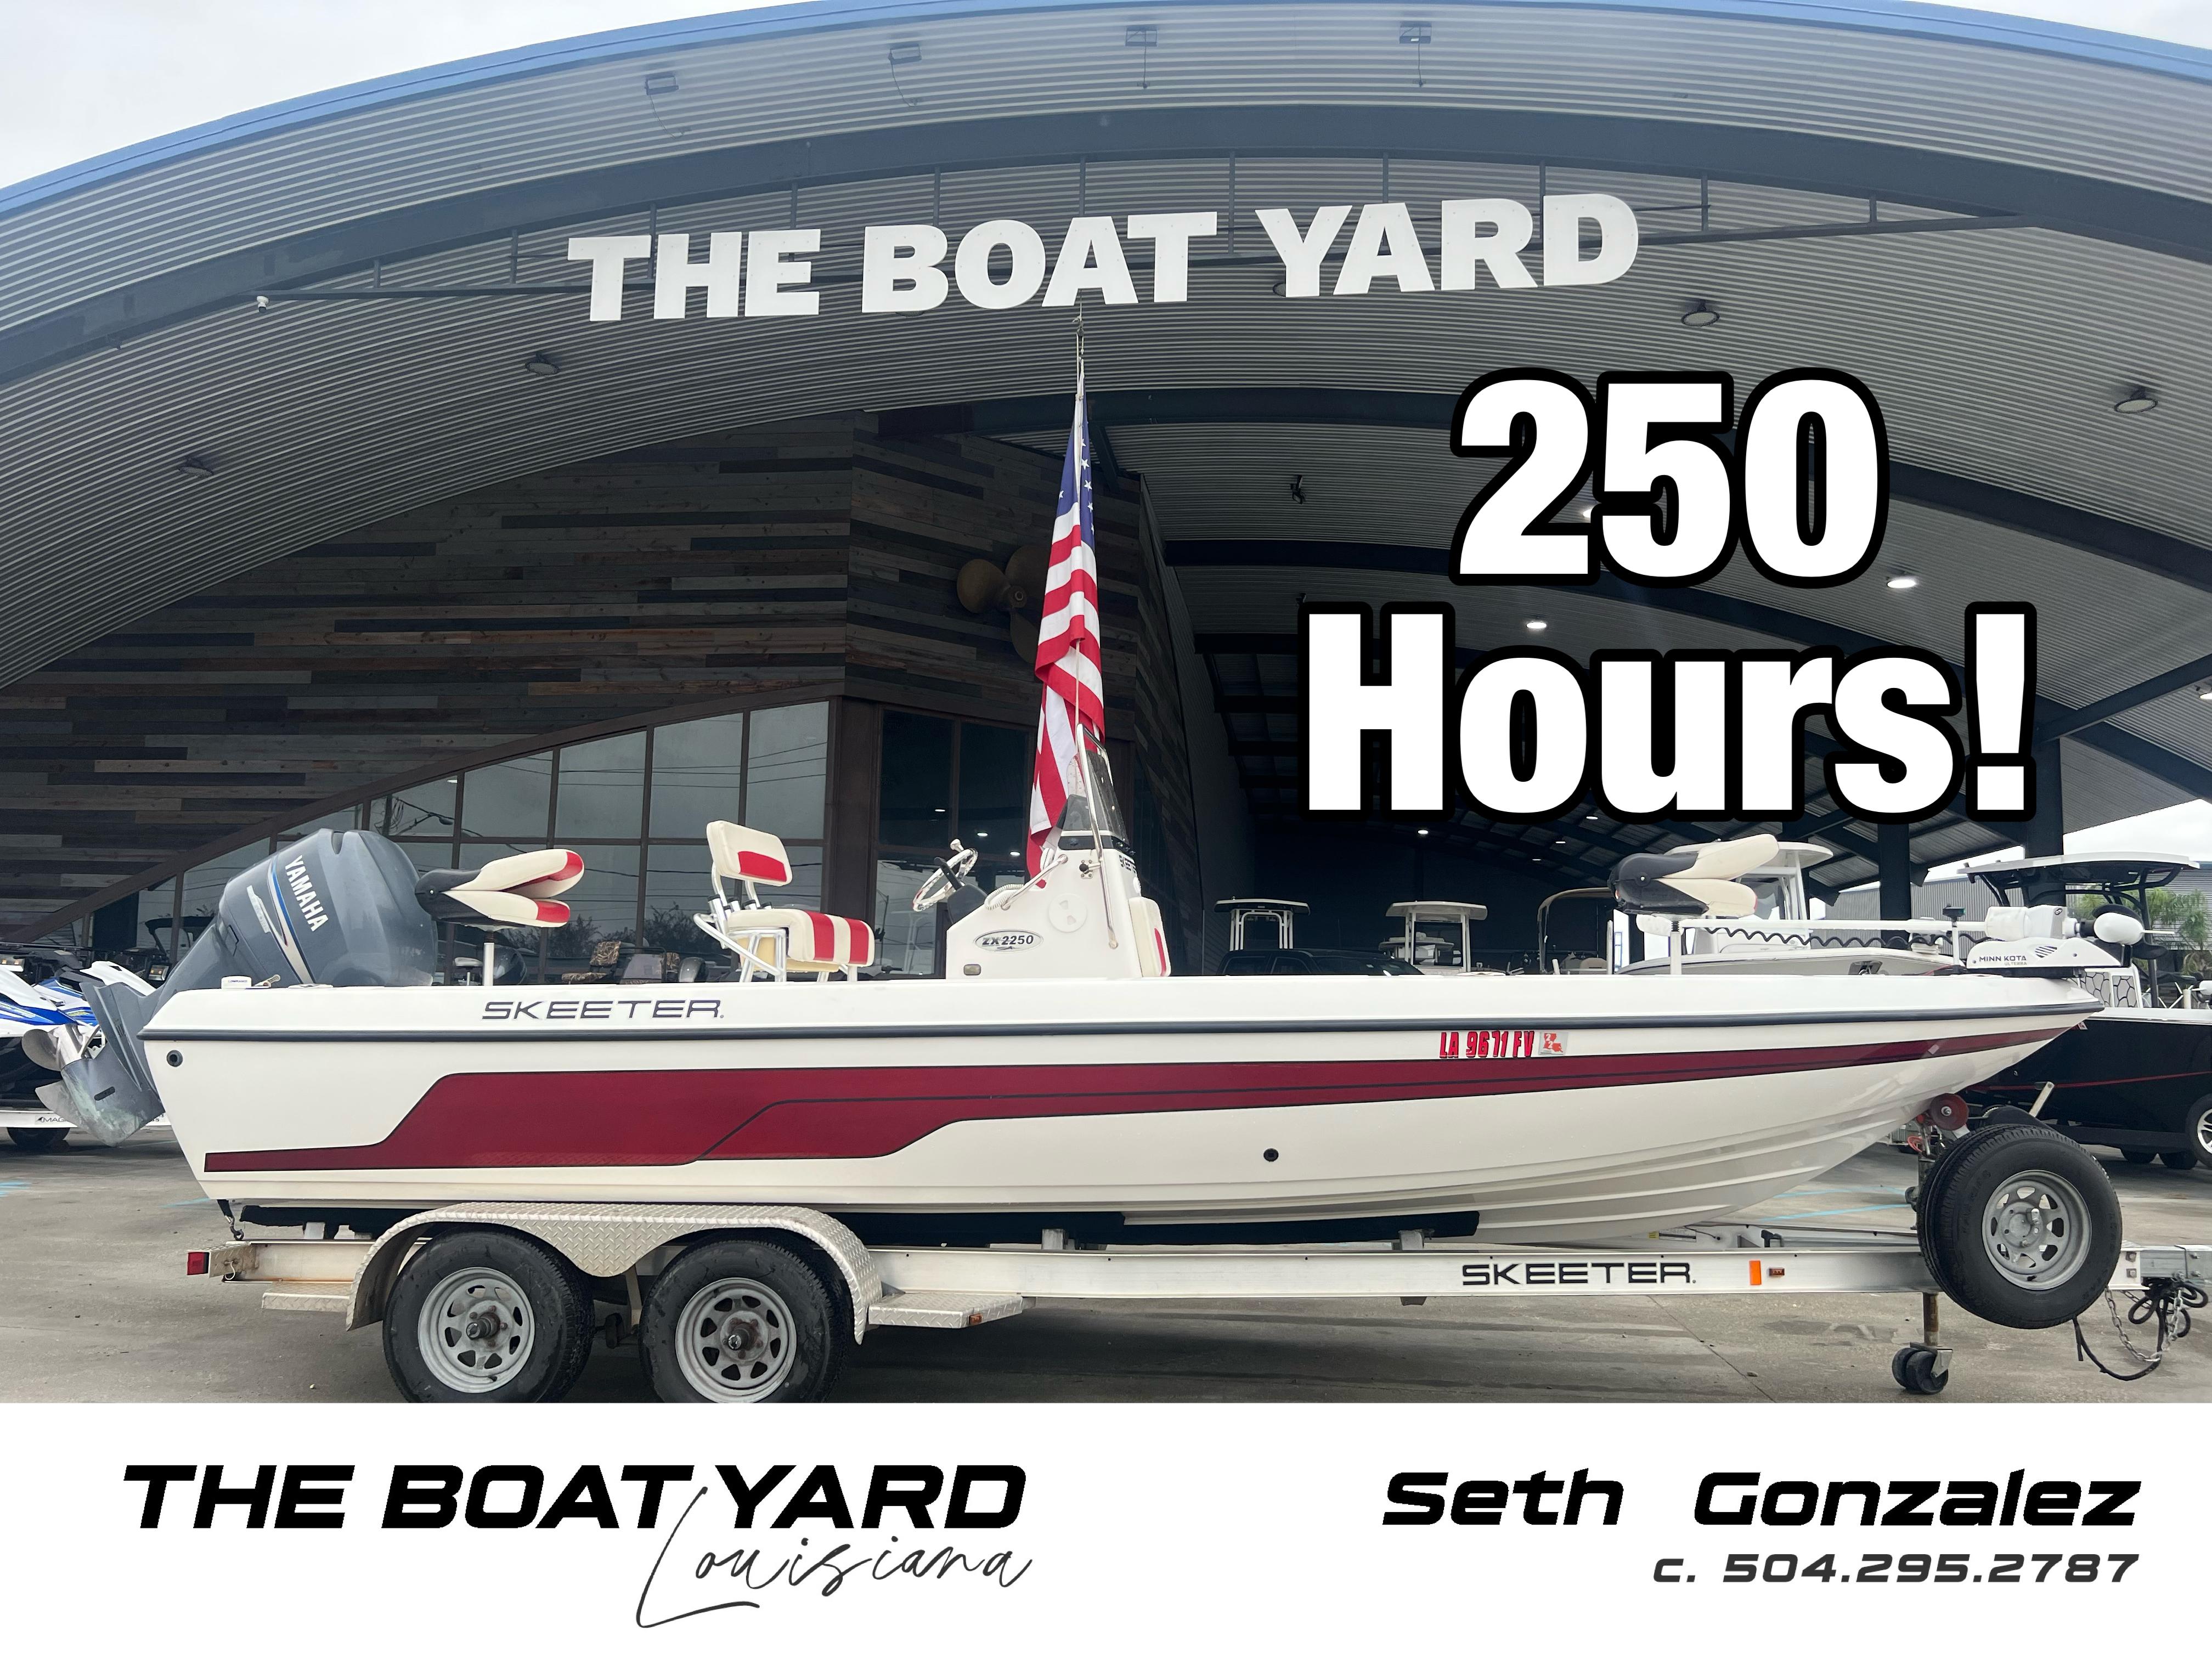 Skeeter 2250 Zx boats for sale - boats.com